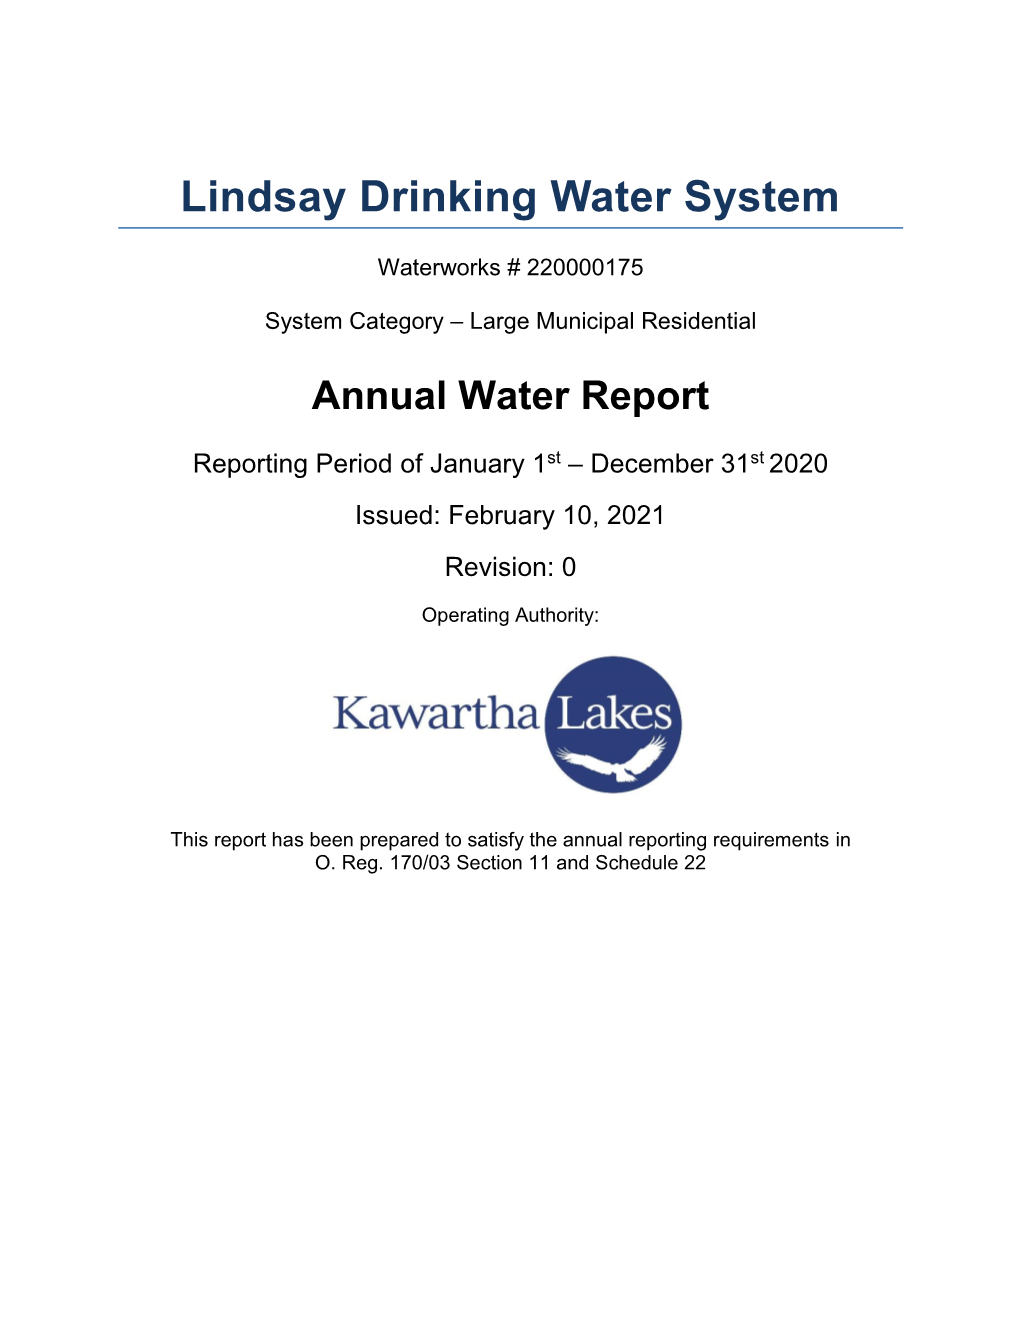 2020 Annual Drinking Water Report for the Lindsay Drinking Water System